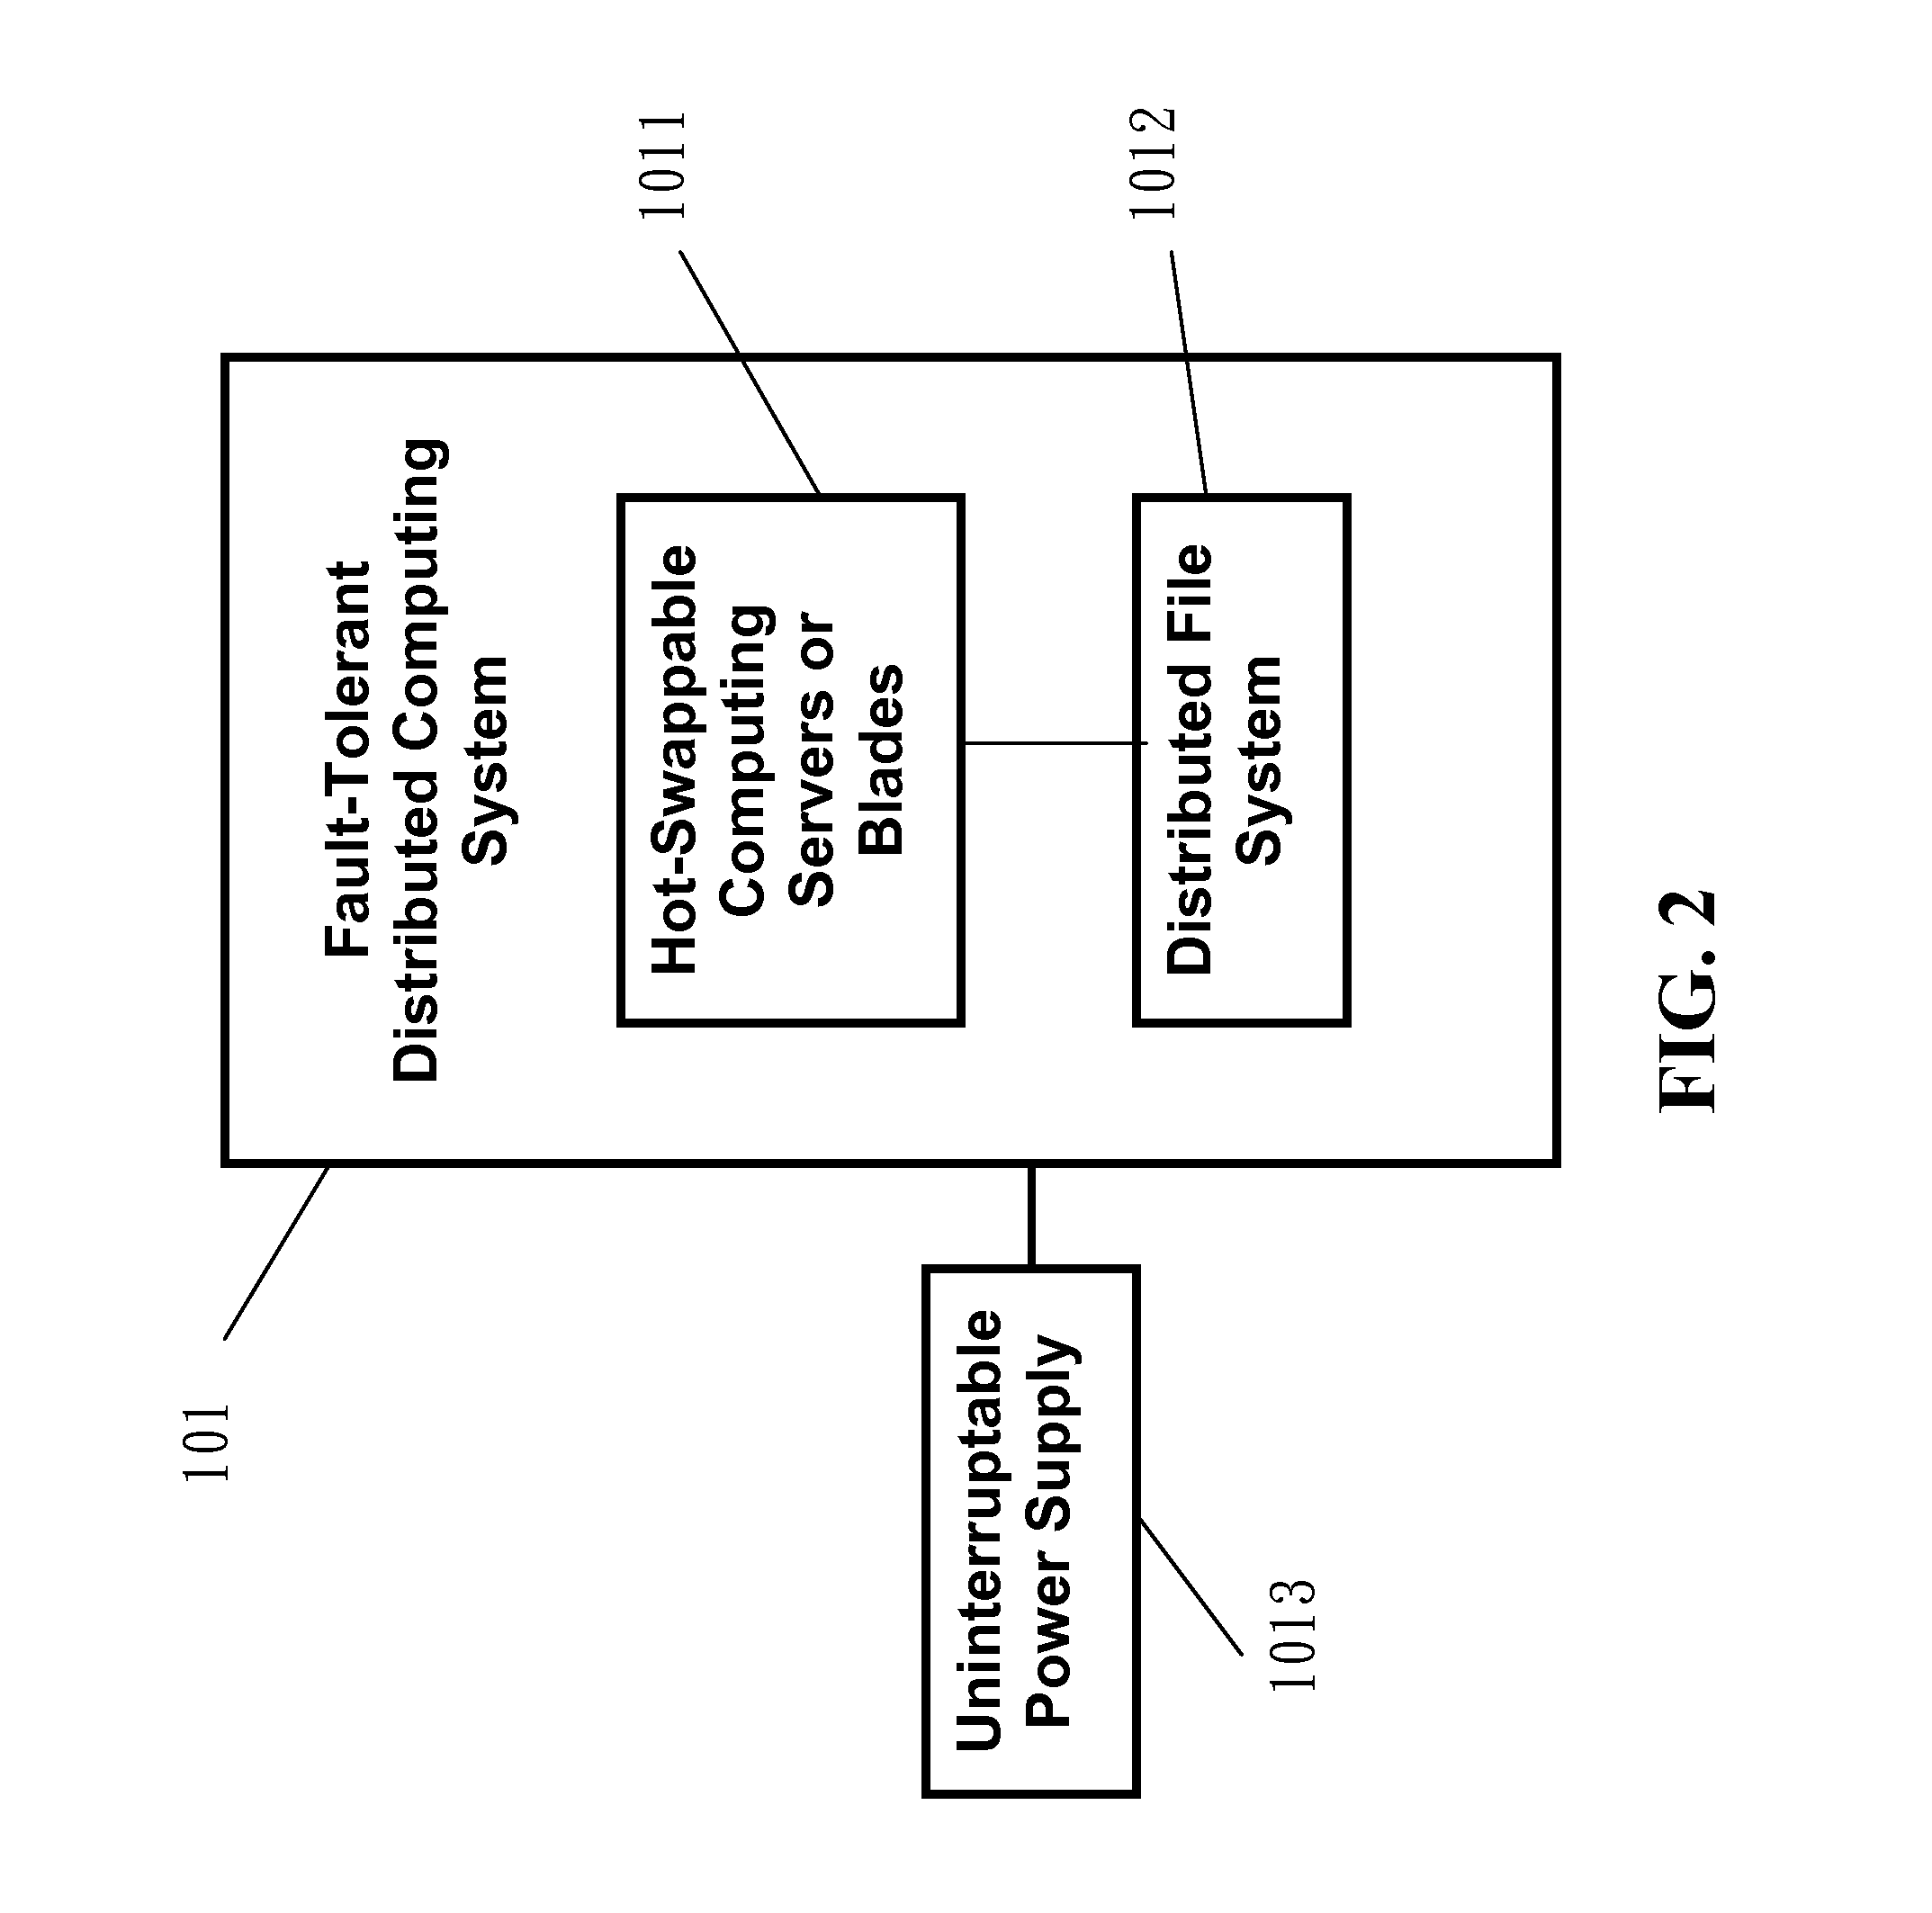 Apparatus For Design-Based Manufacturing Optimization In Semiconductor Fab